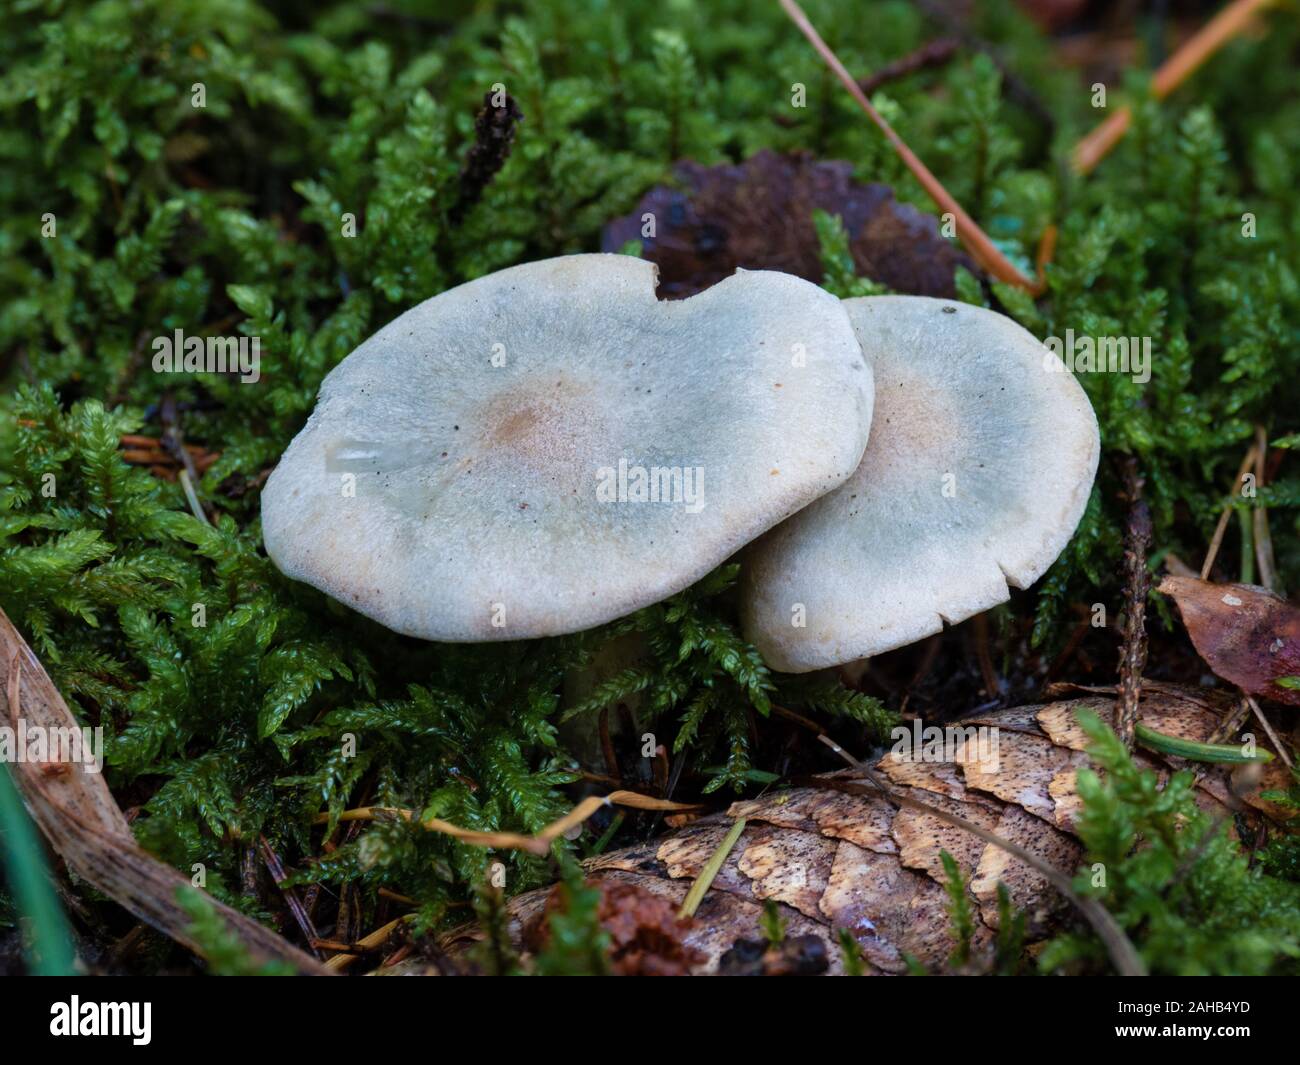 Clitocybe odora, also known as the aniseed toadstool, growing in Görvälns naturreservat, Sweden. Stock Photo